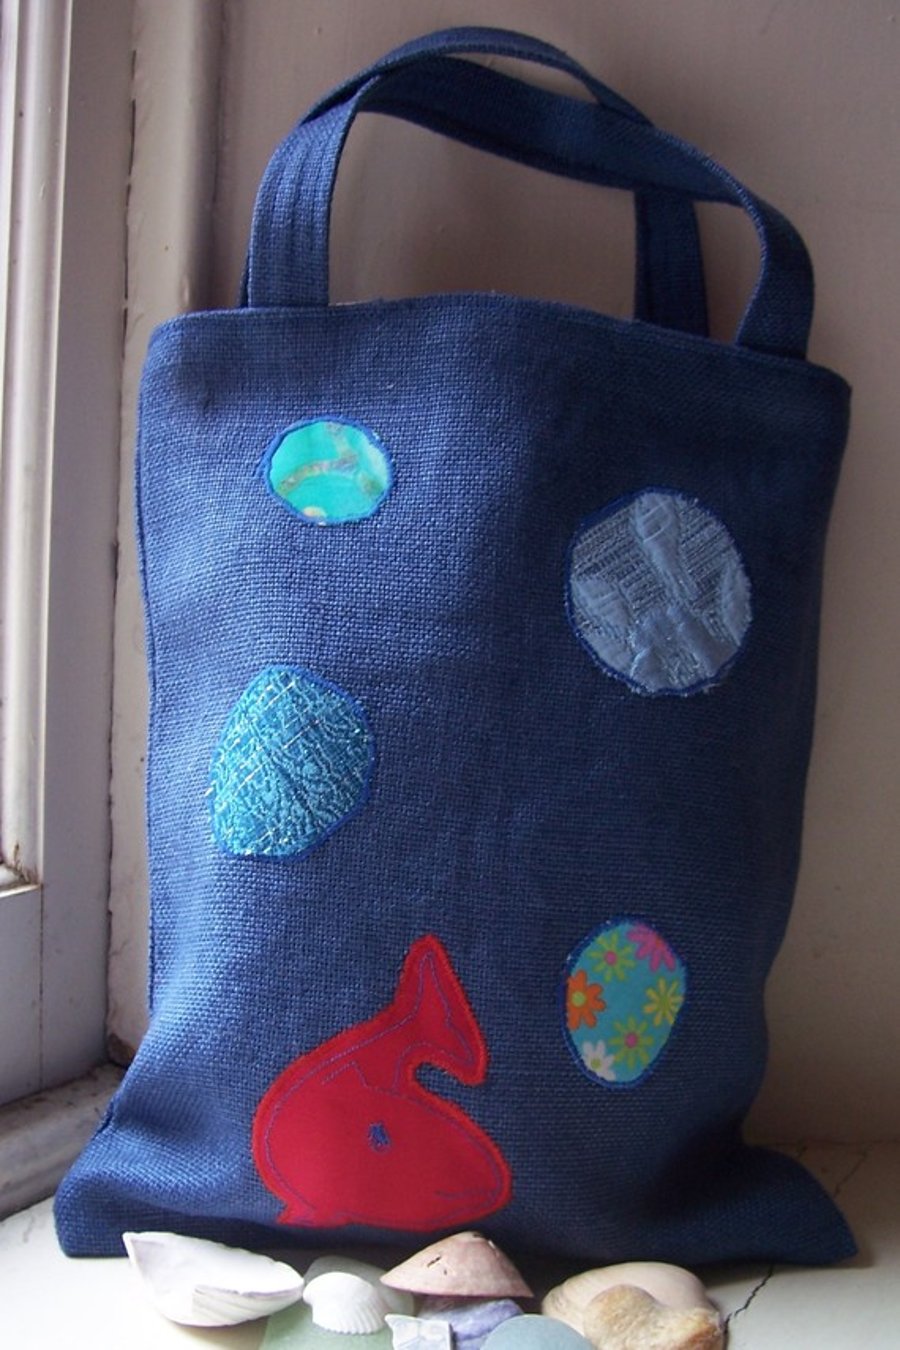 Bubbles - tote bag with fish and bubble appliques, in blue and red